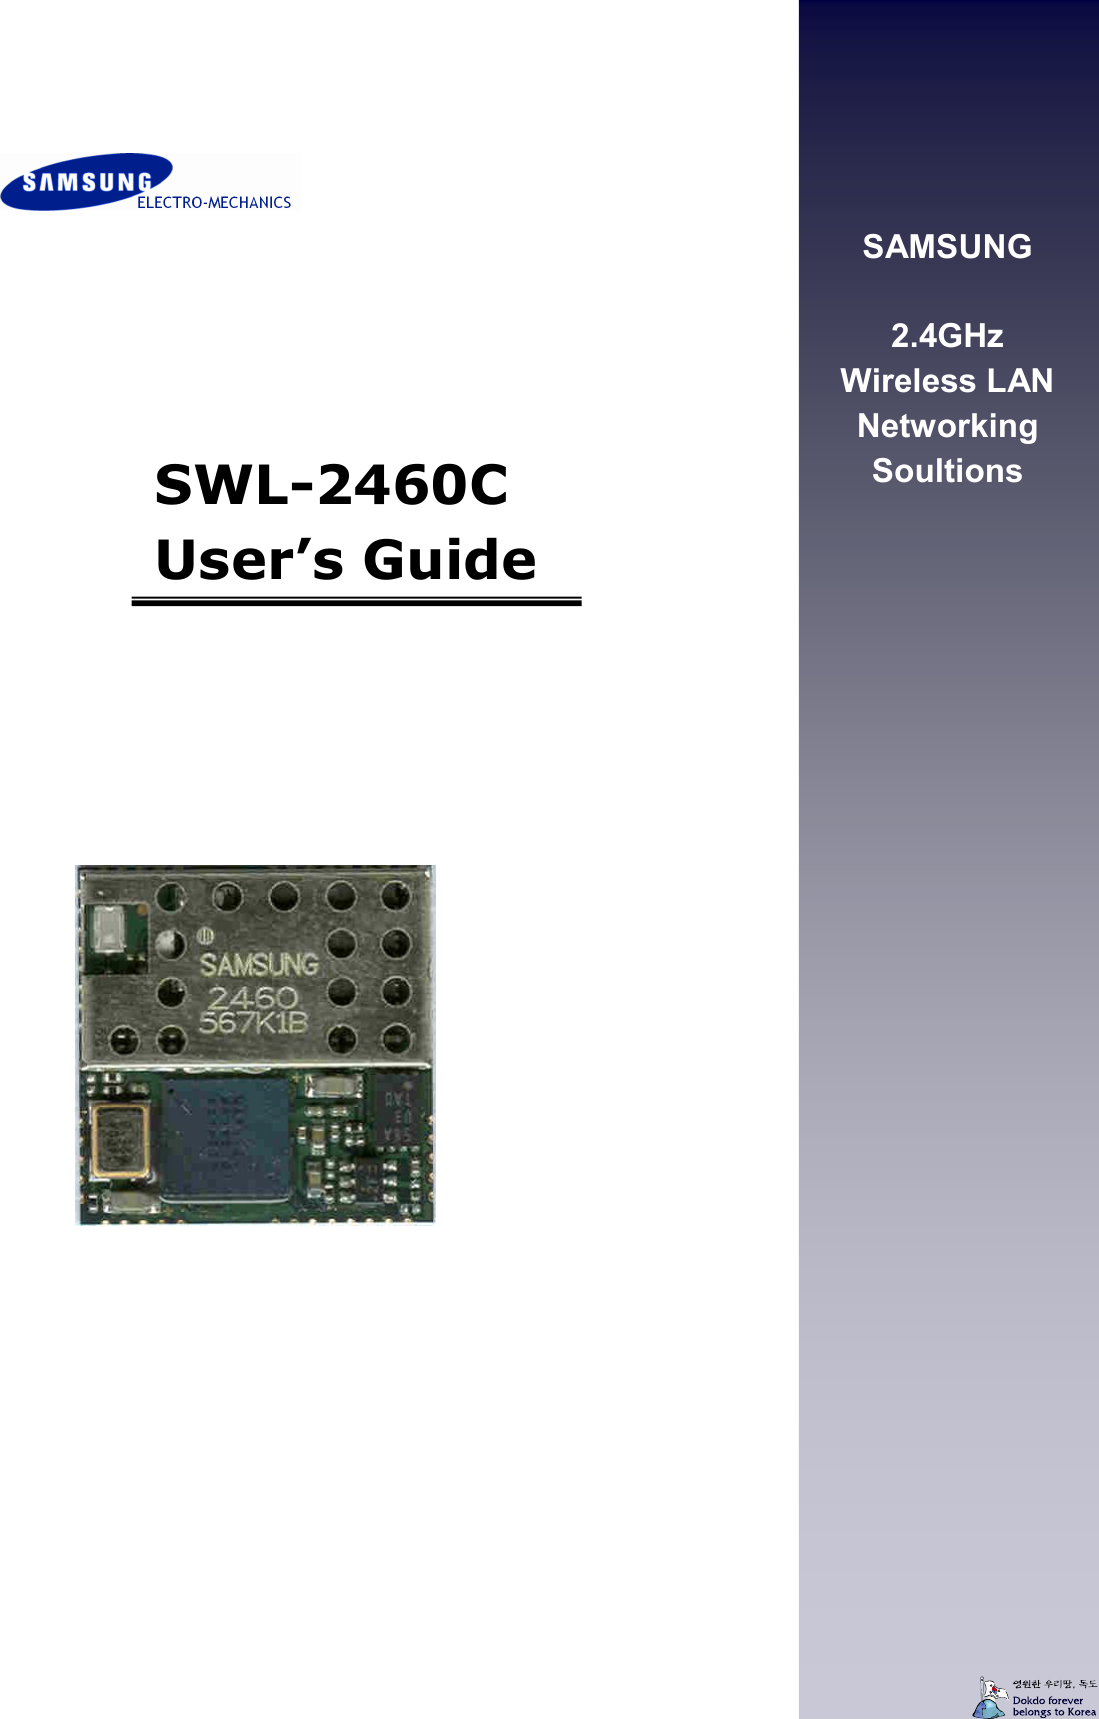        SWL-2460C User’s Guide         SAMSUNG   2.4GHz   Wireless LAN Networking Soultions 